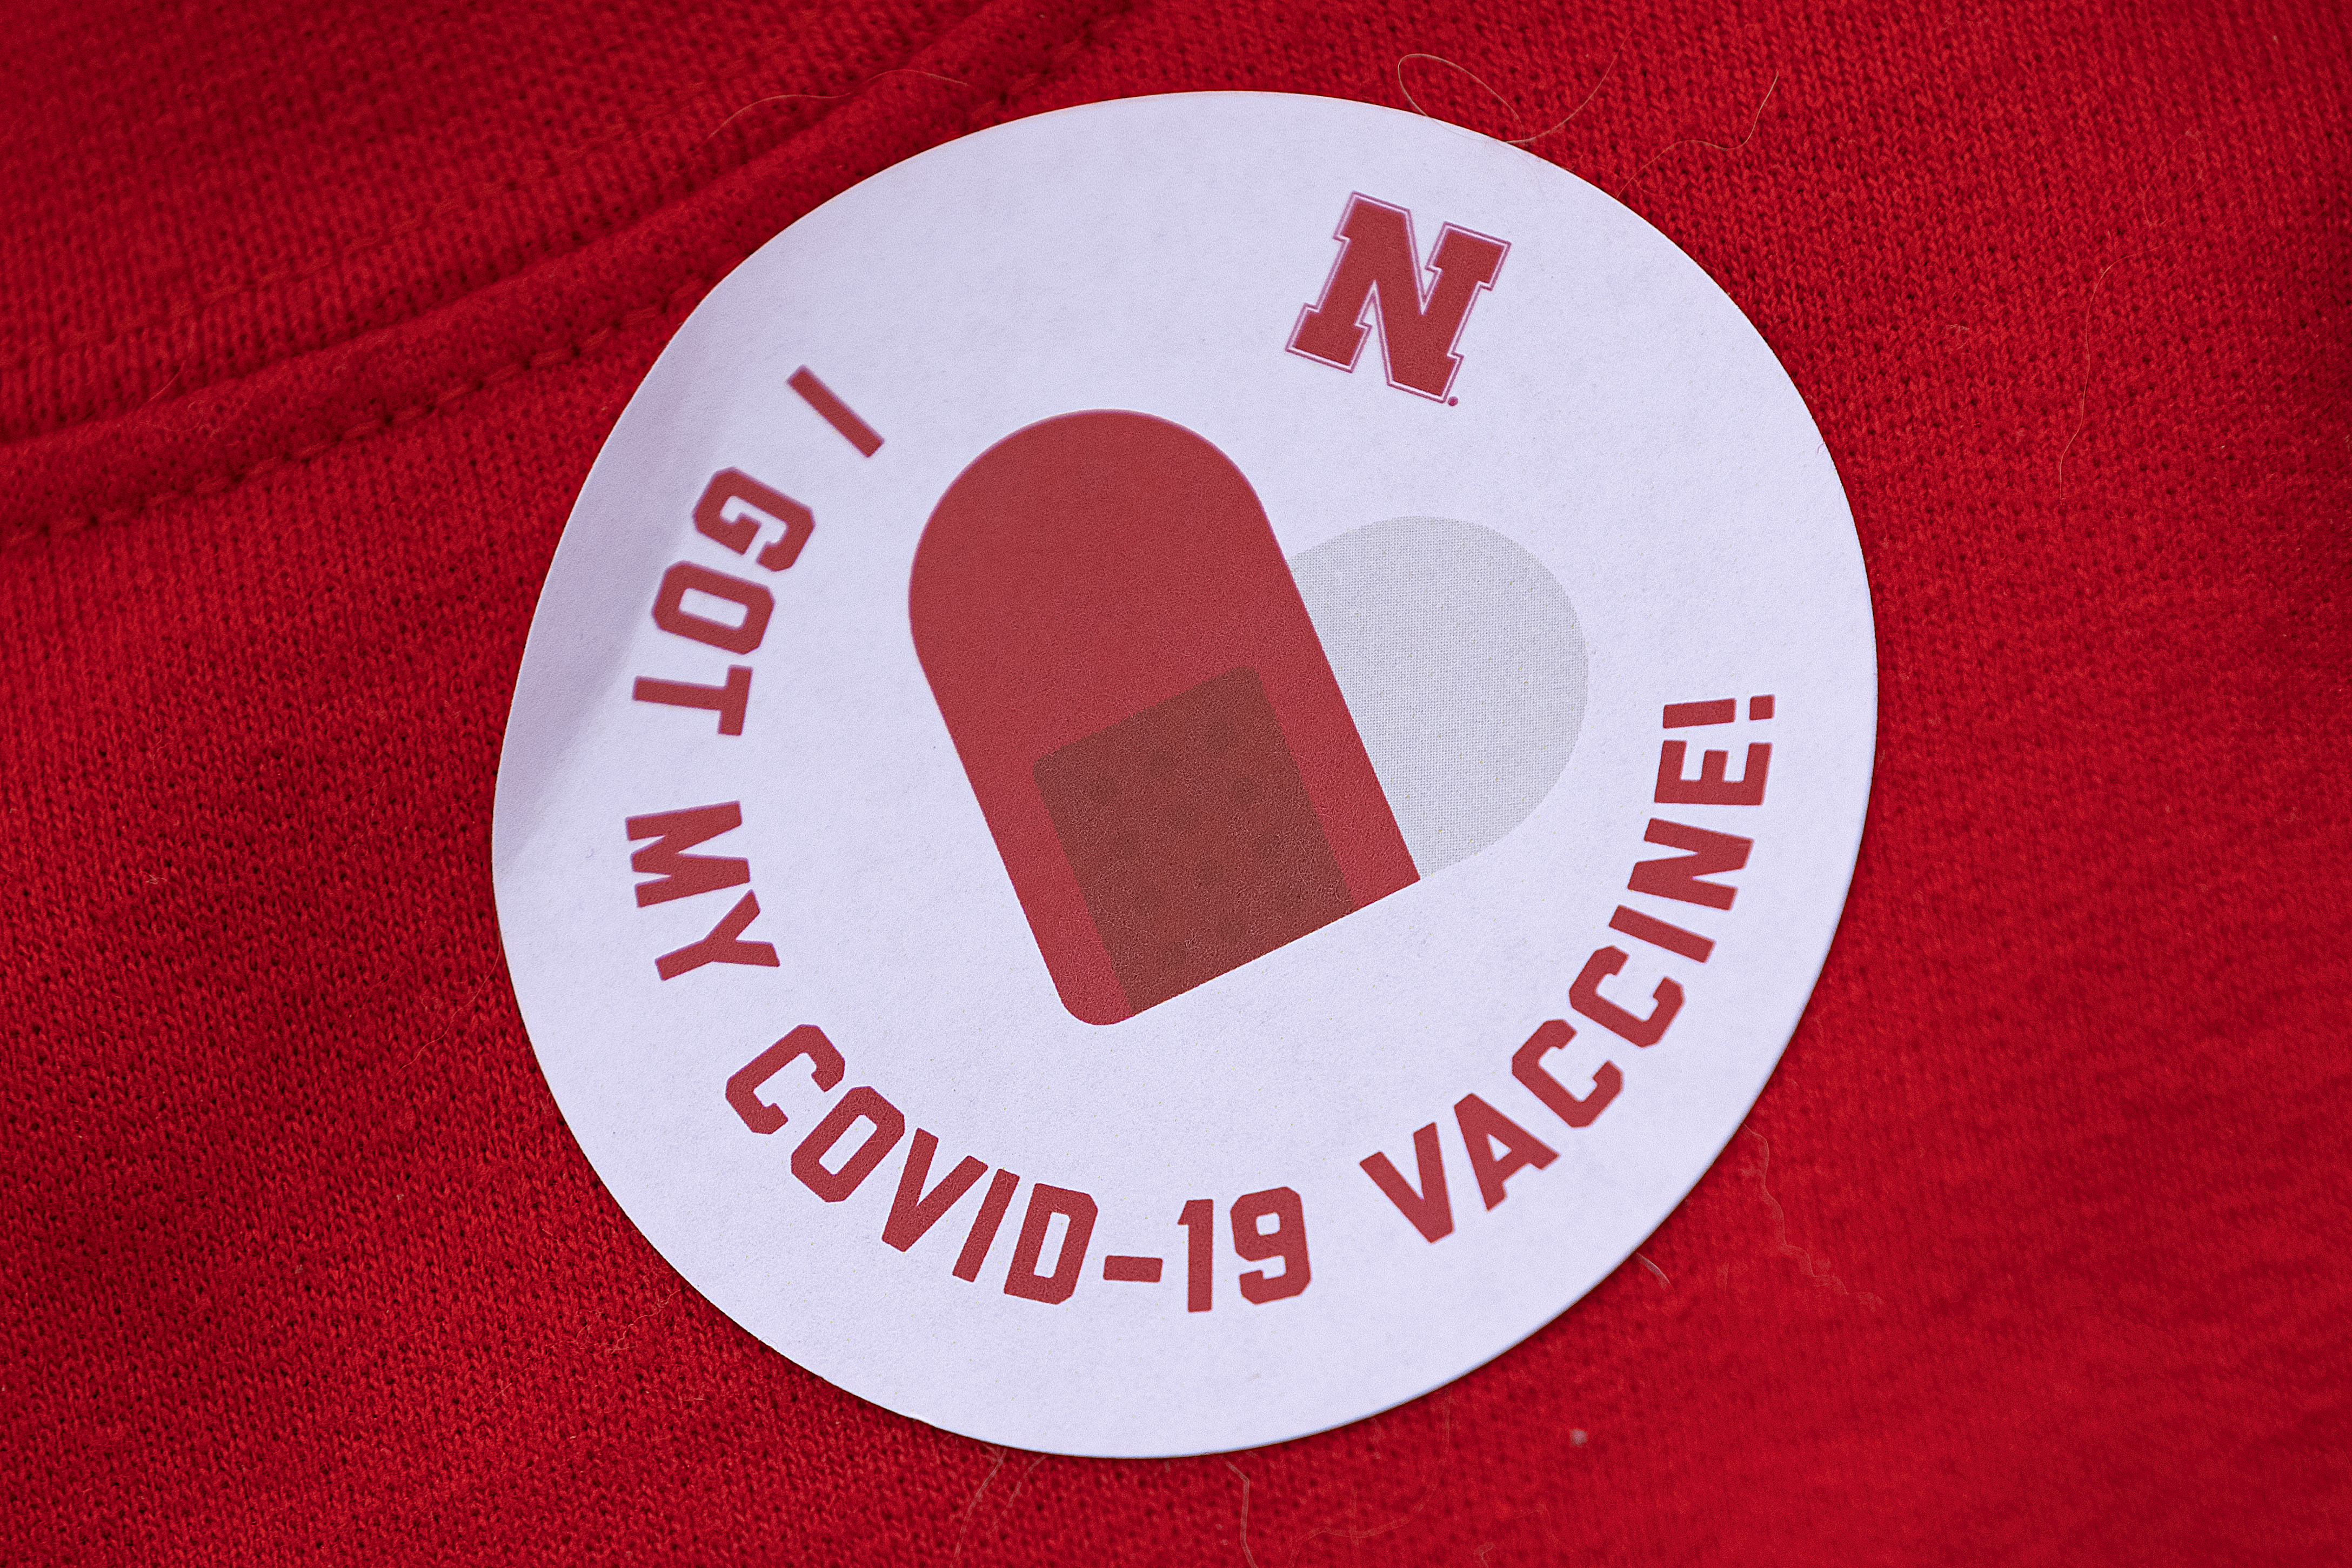 The university is giving away prizes to all students, faculty and staff who are vaccinated and voluntarily upload their status to an online registry. The prizes are being awarded weekly through Aug. 13.